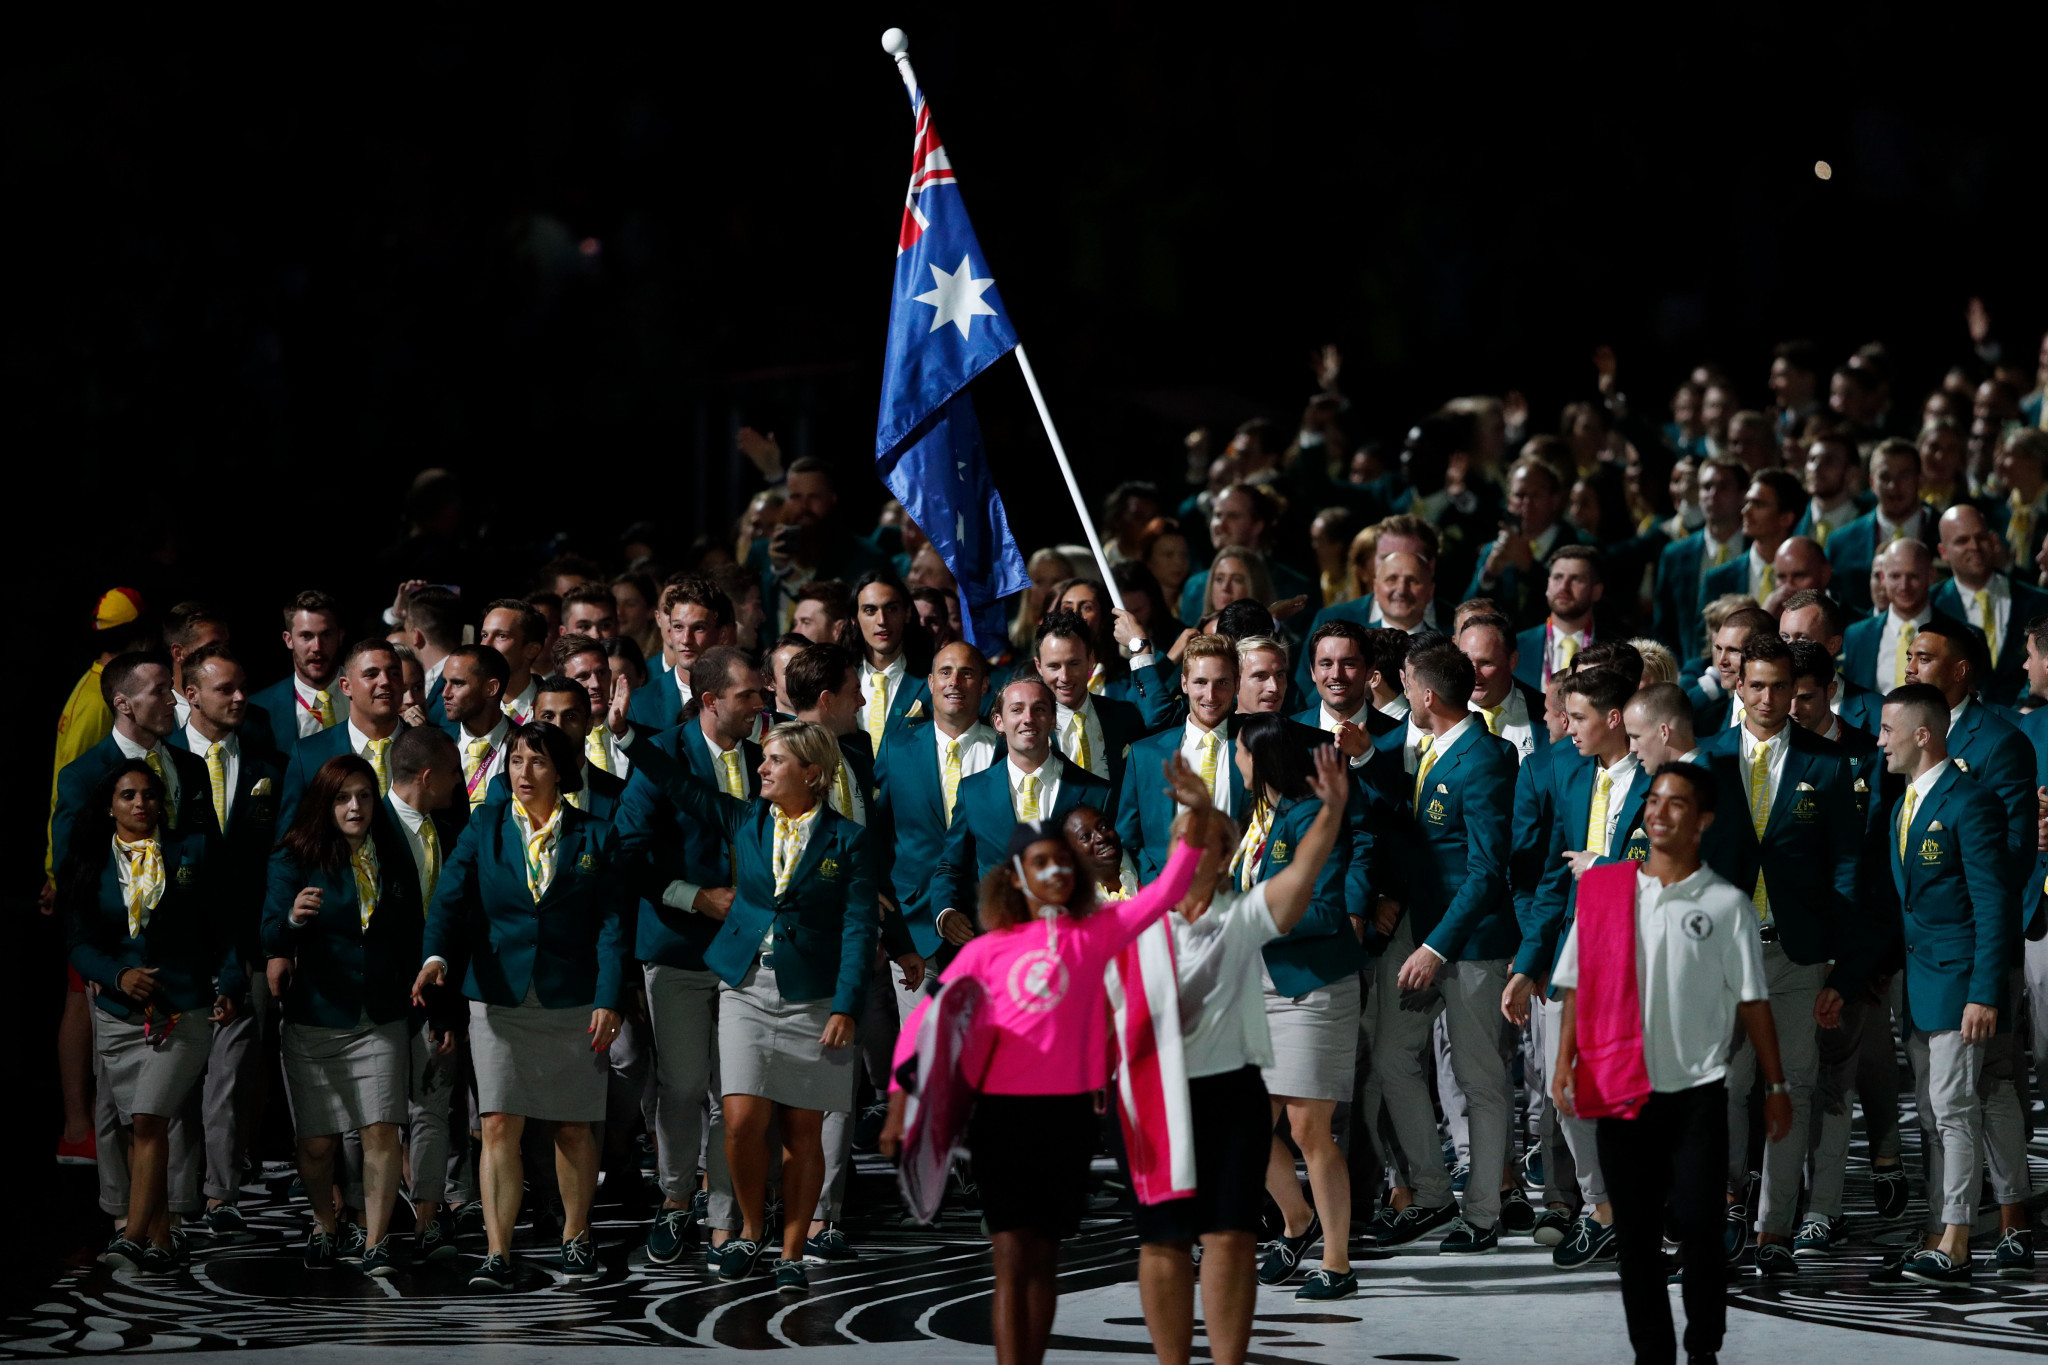 Australia's arrival was a highlight of the Opening Ceremony ©Getty Images